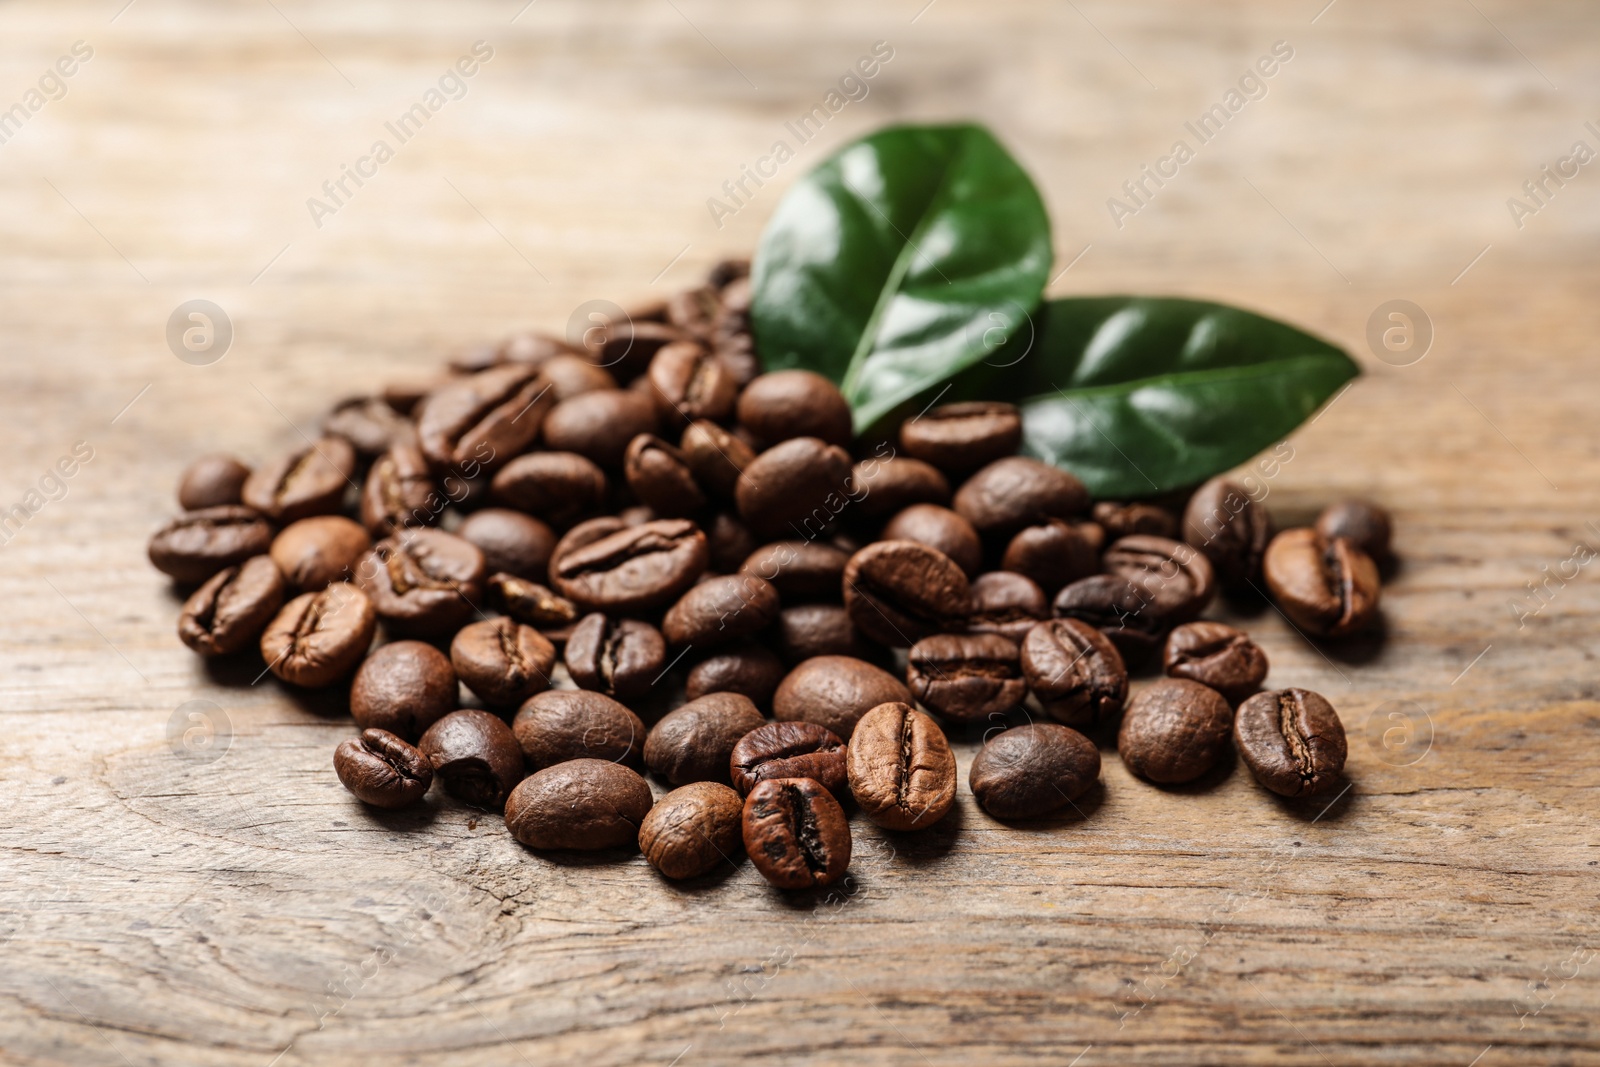 Photo of Pile of coffee beans and fresh green leaves on wooden table